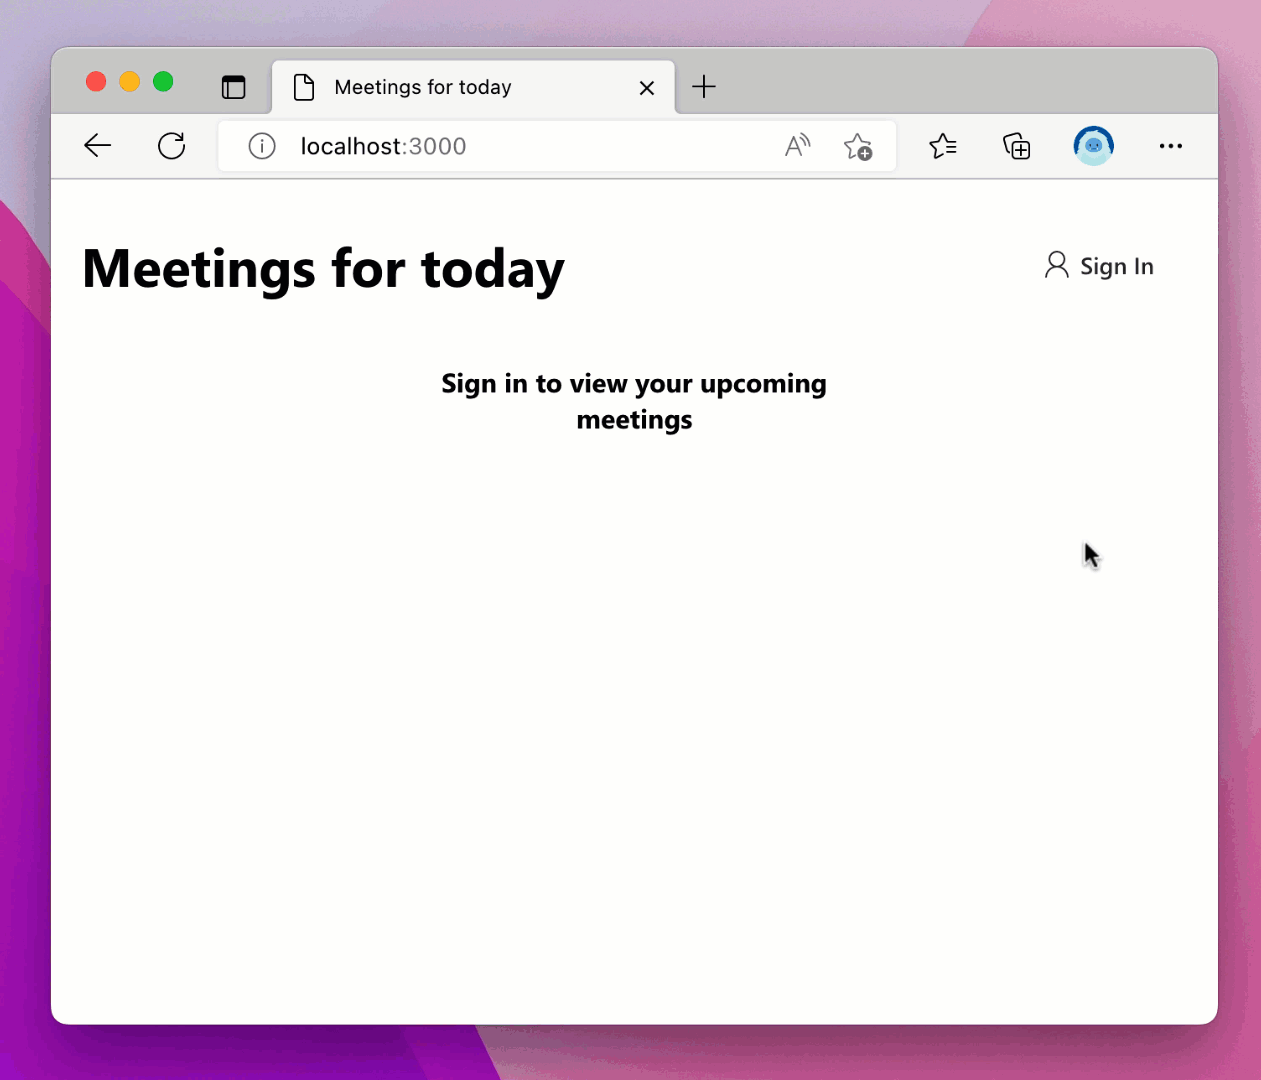 Animated gif showing signing in to the app with a Microsoft 365 account and viewing upcoming meetings